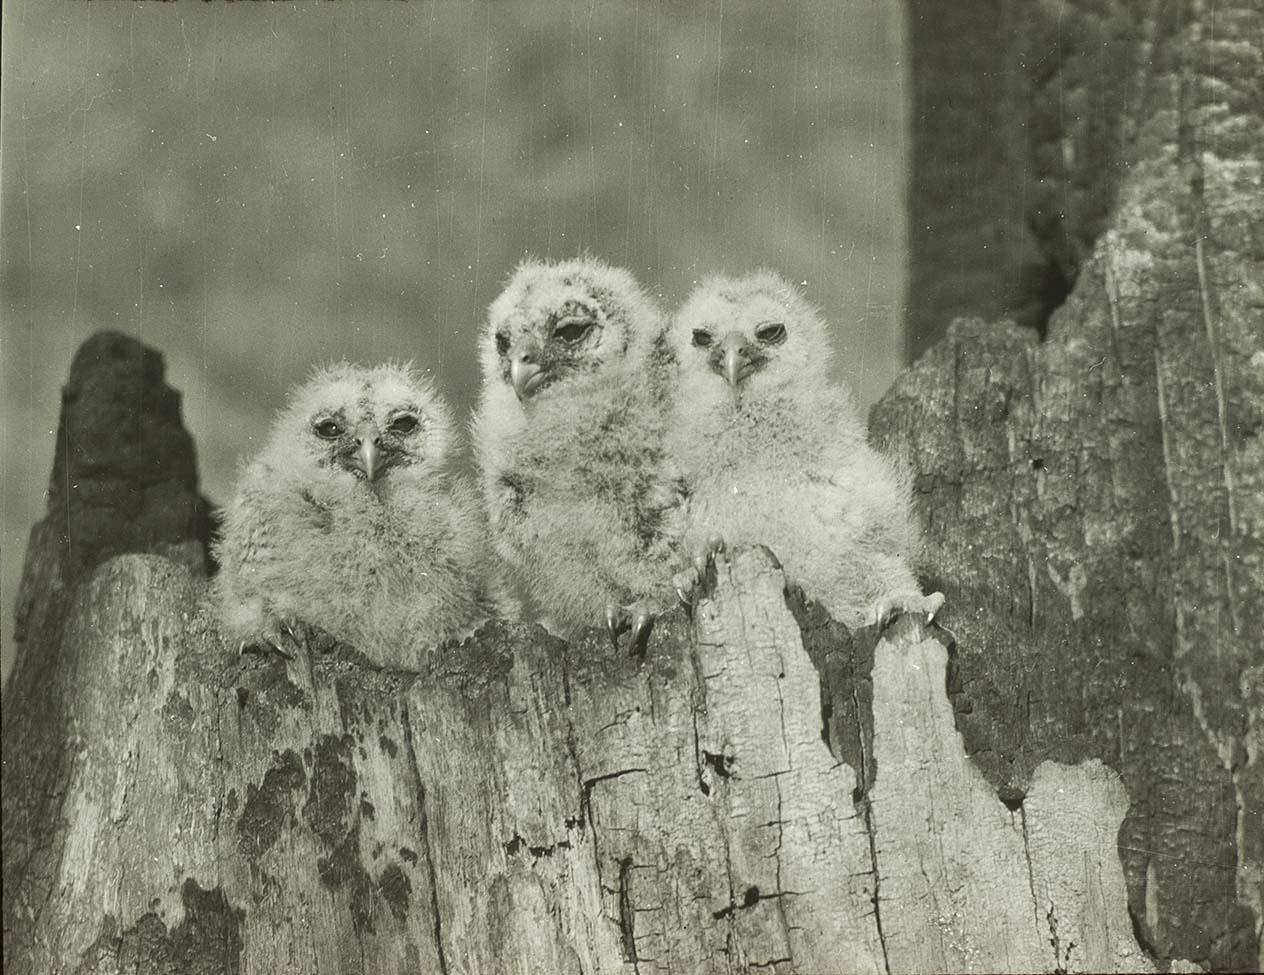 Lantern slide and photograph of three young Barred Owls perching on a tree trunk